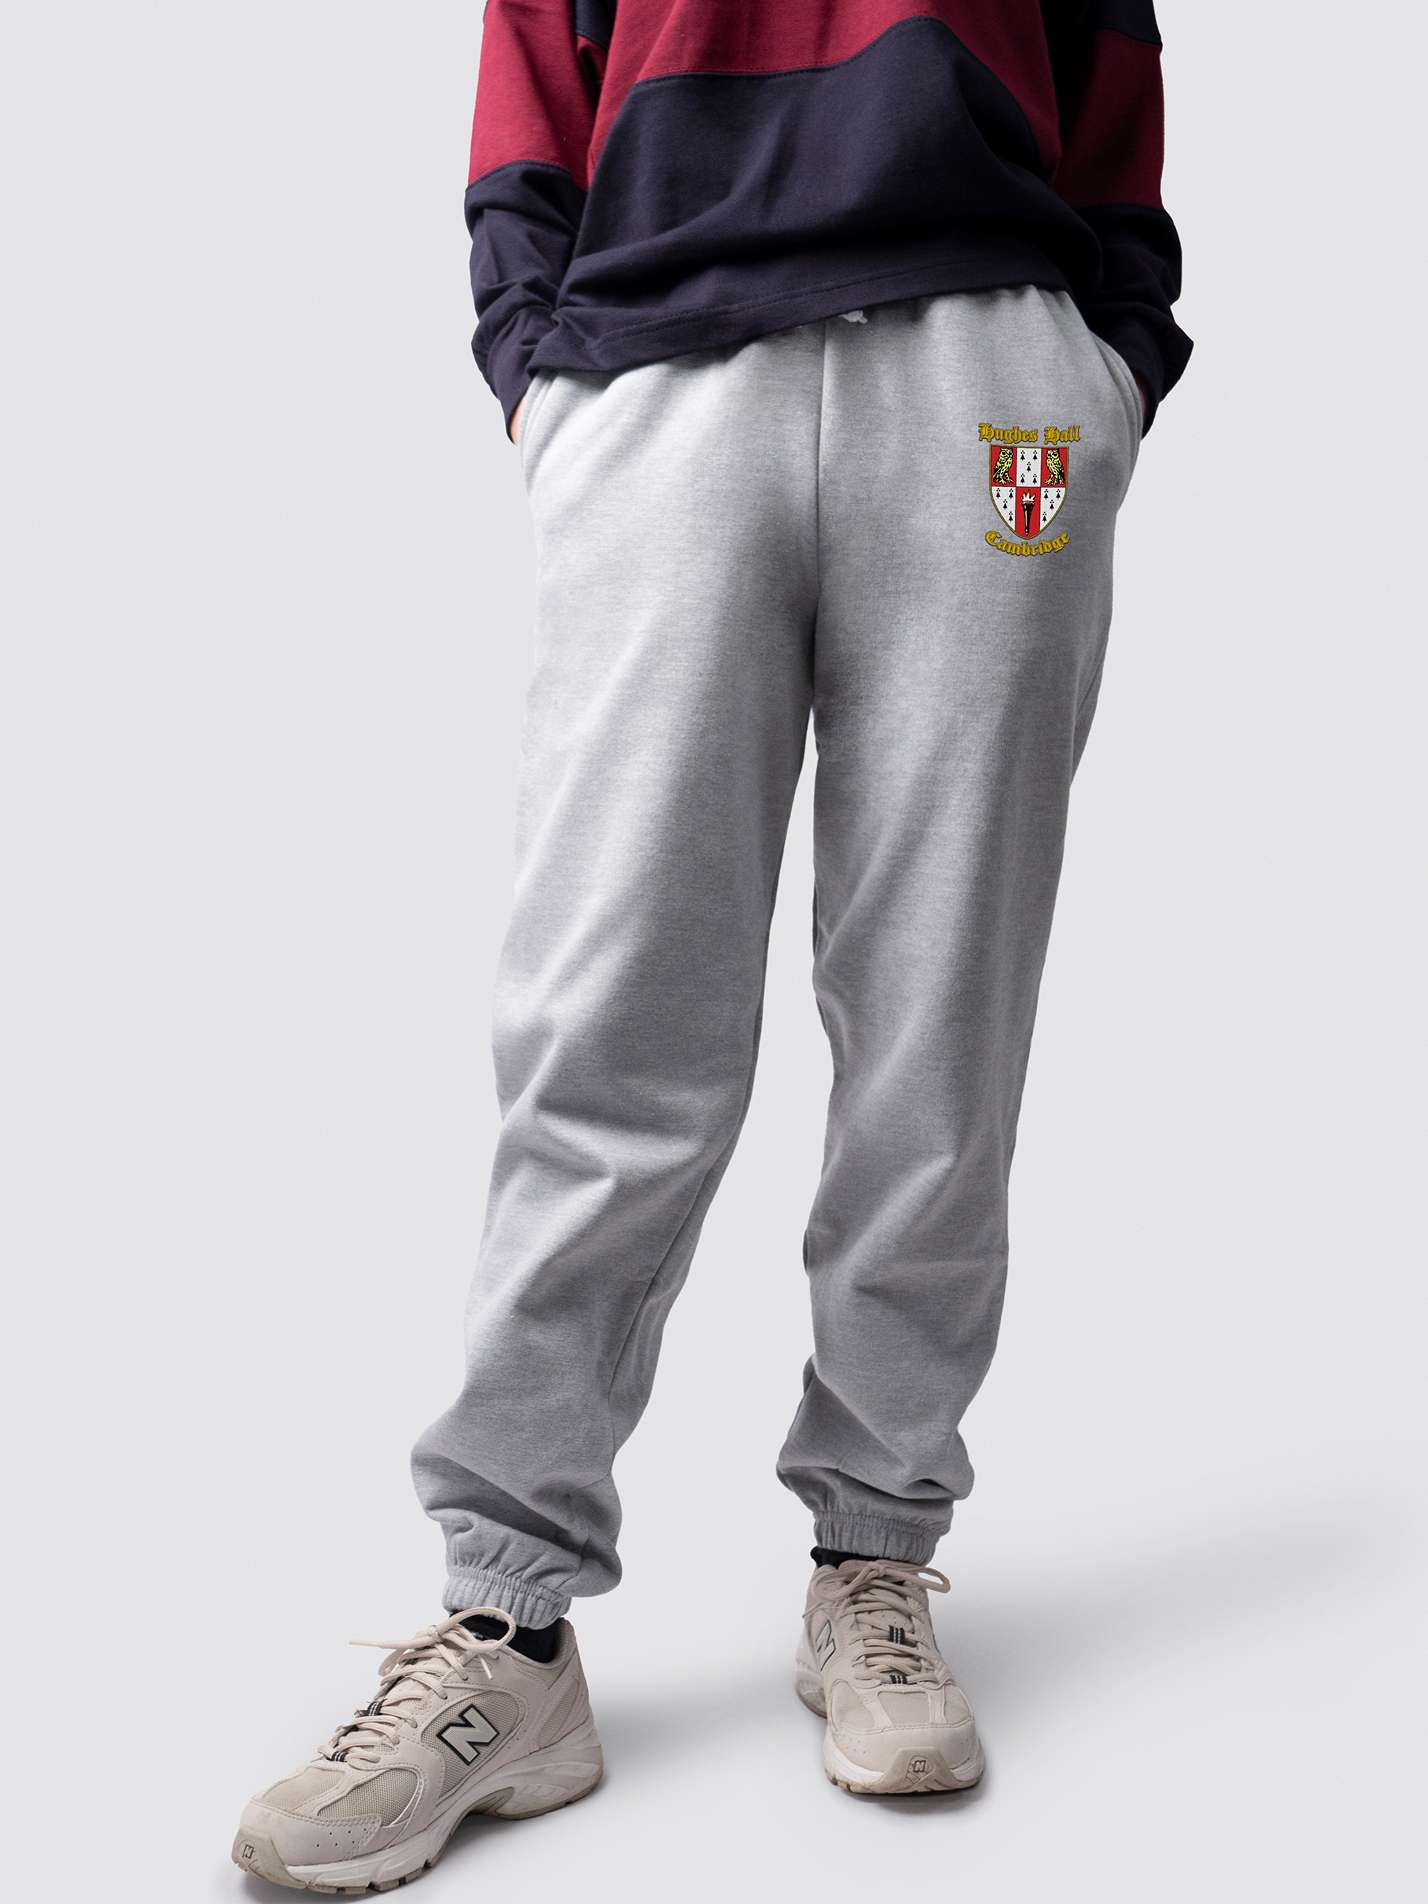 undergraduate cuffed sweatpants, made from soft cotton fabric, with Hughes Hall logo